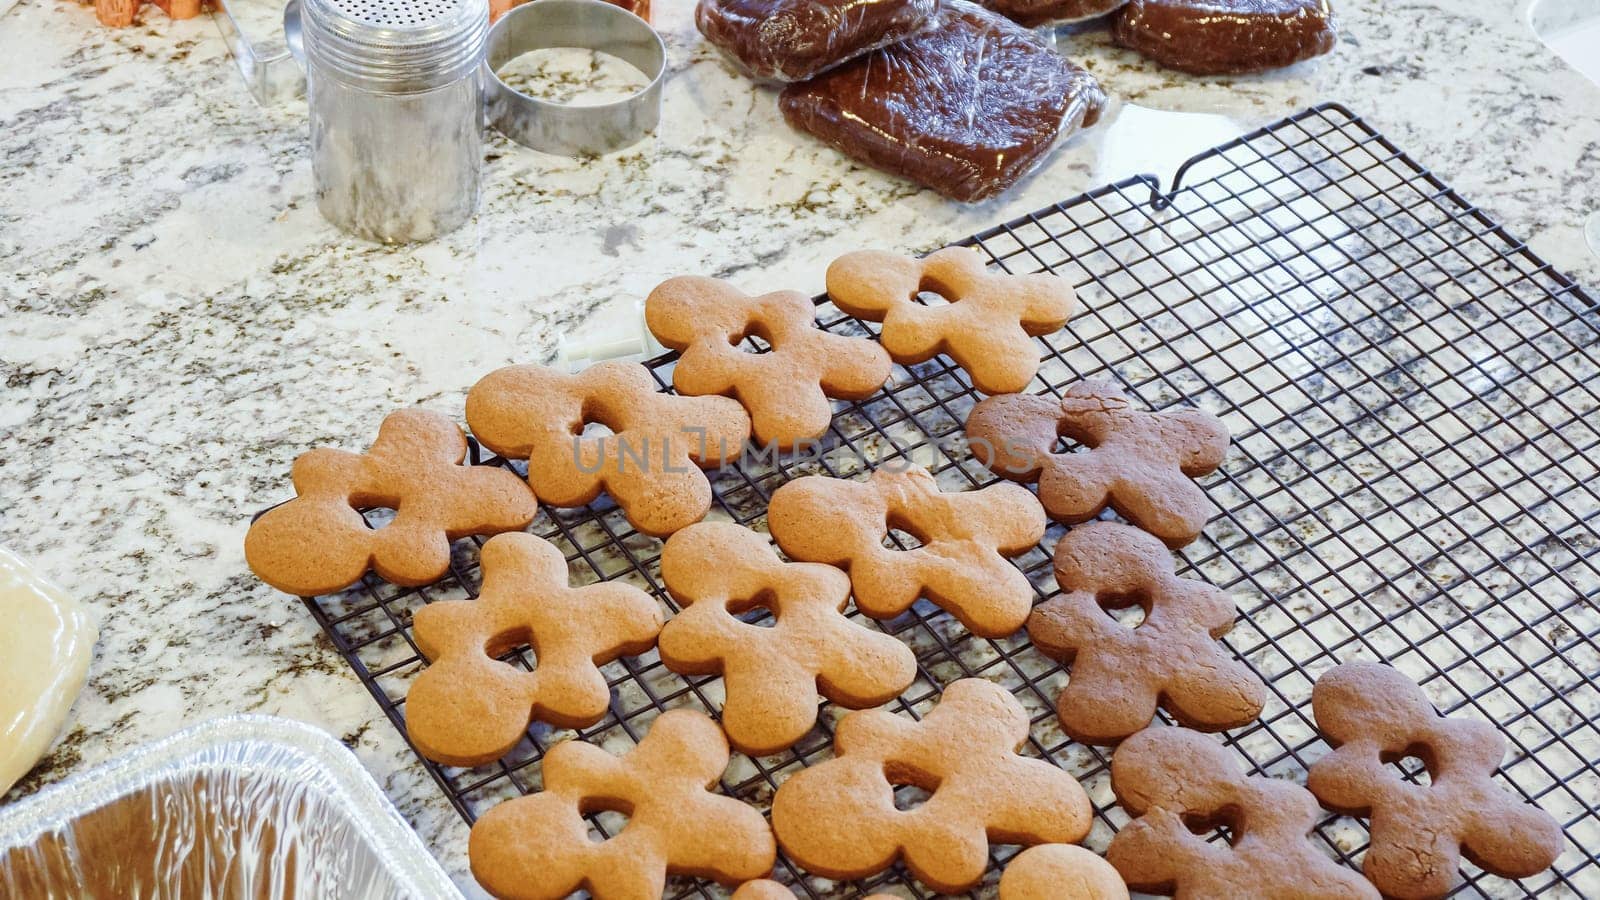 After baking to perfection, these delightful gingerbread cookies are now cooling gracefully on a wire rack, filling the modern kitchen with a warm and inviting aroma.